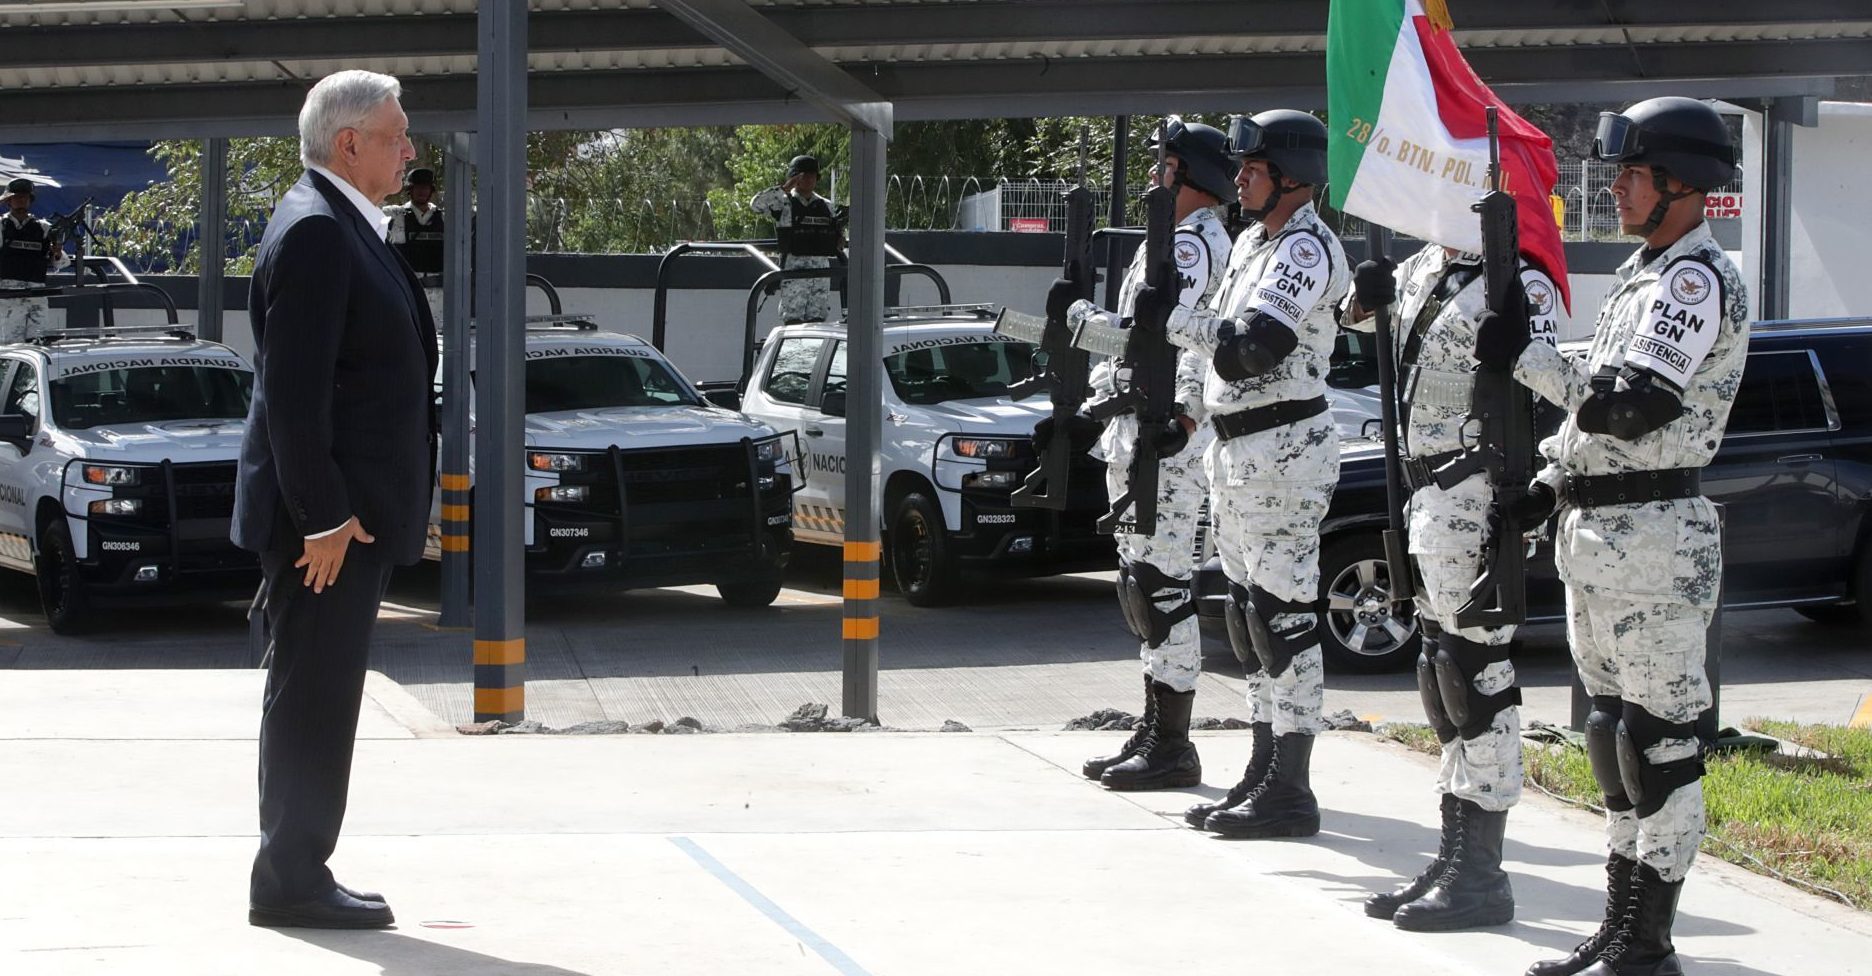 One year after the National Guard in Mexico, violence grows